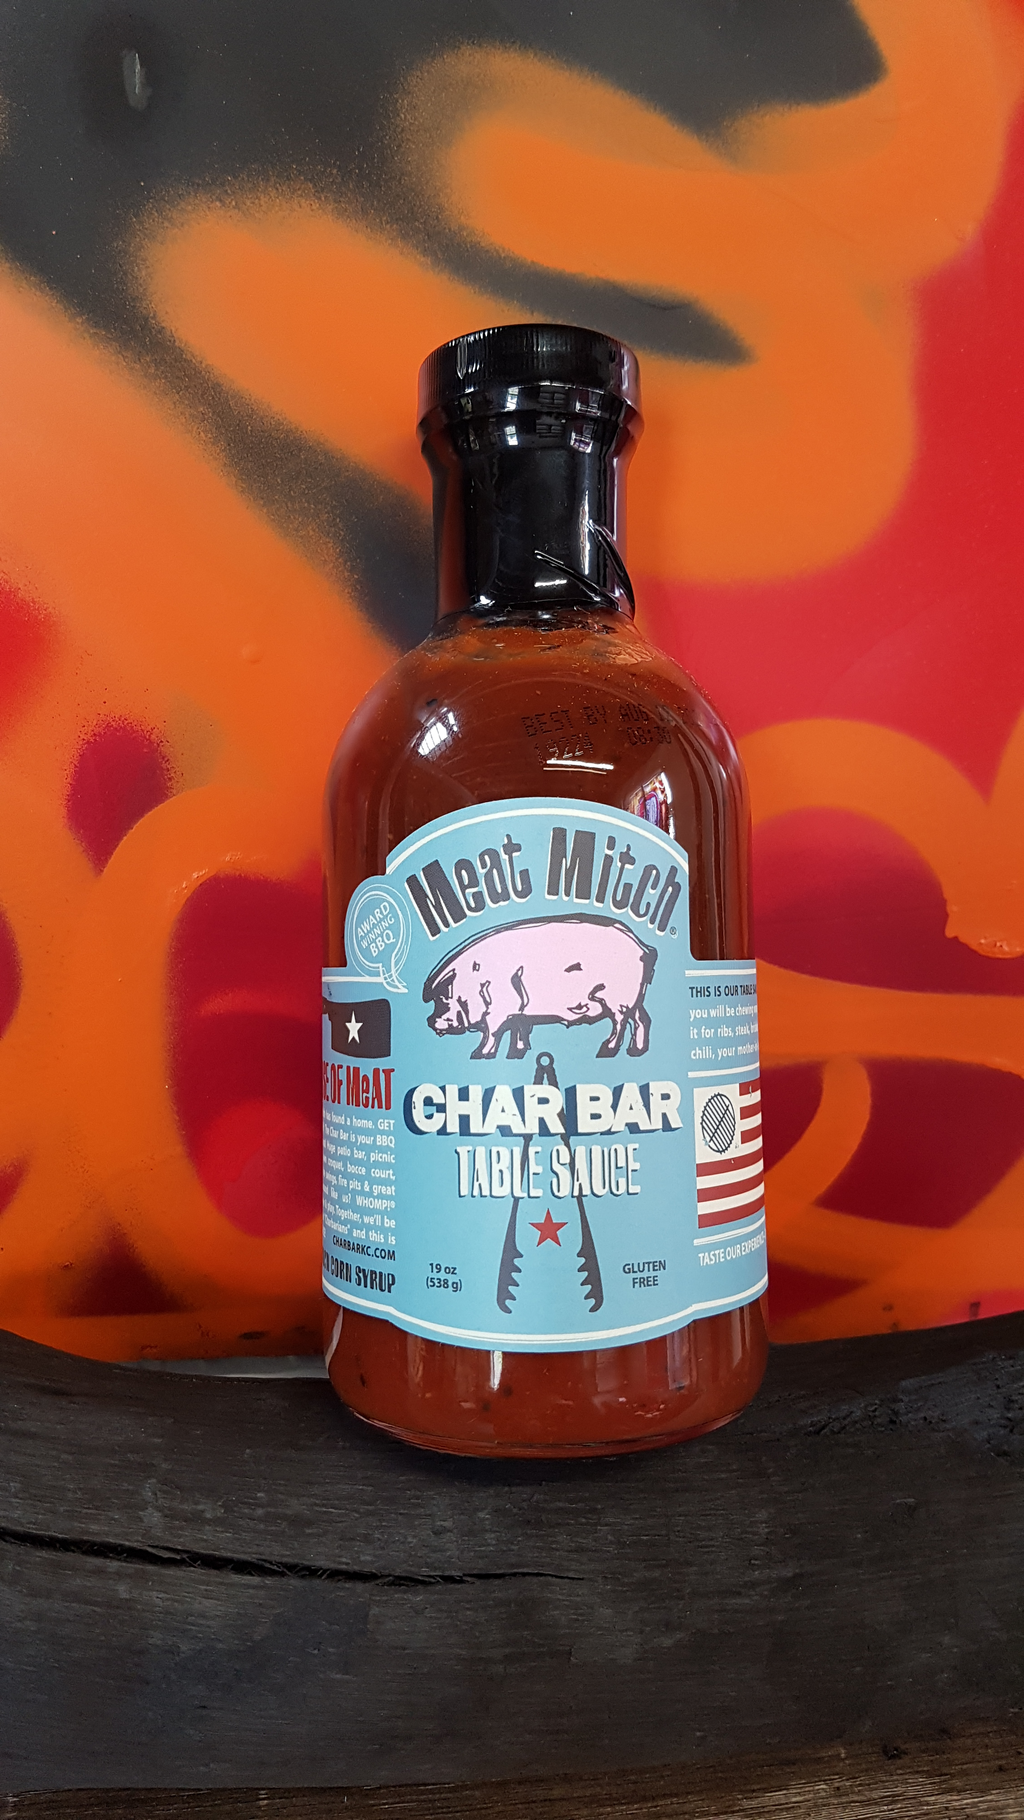 Char Bar Table Sauce 538g by Meat Mitch